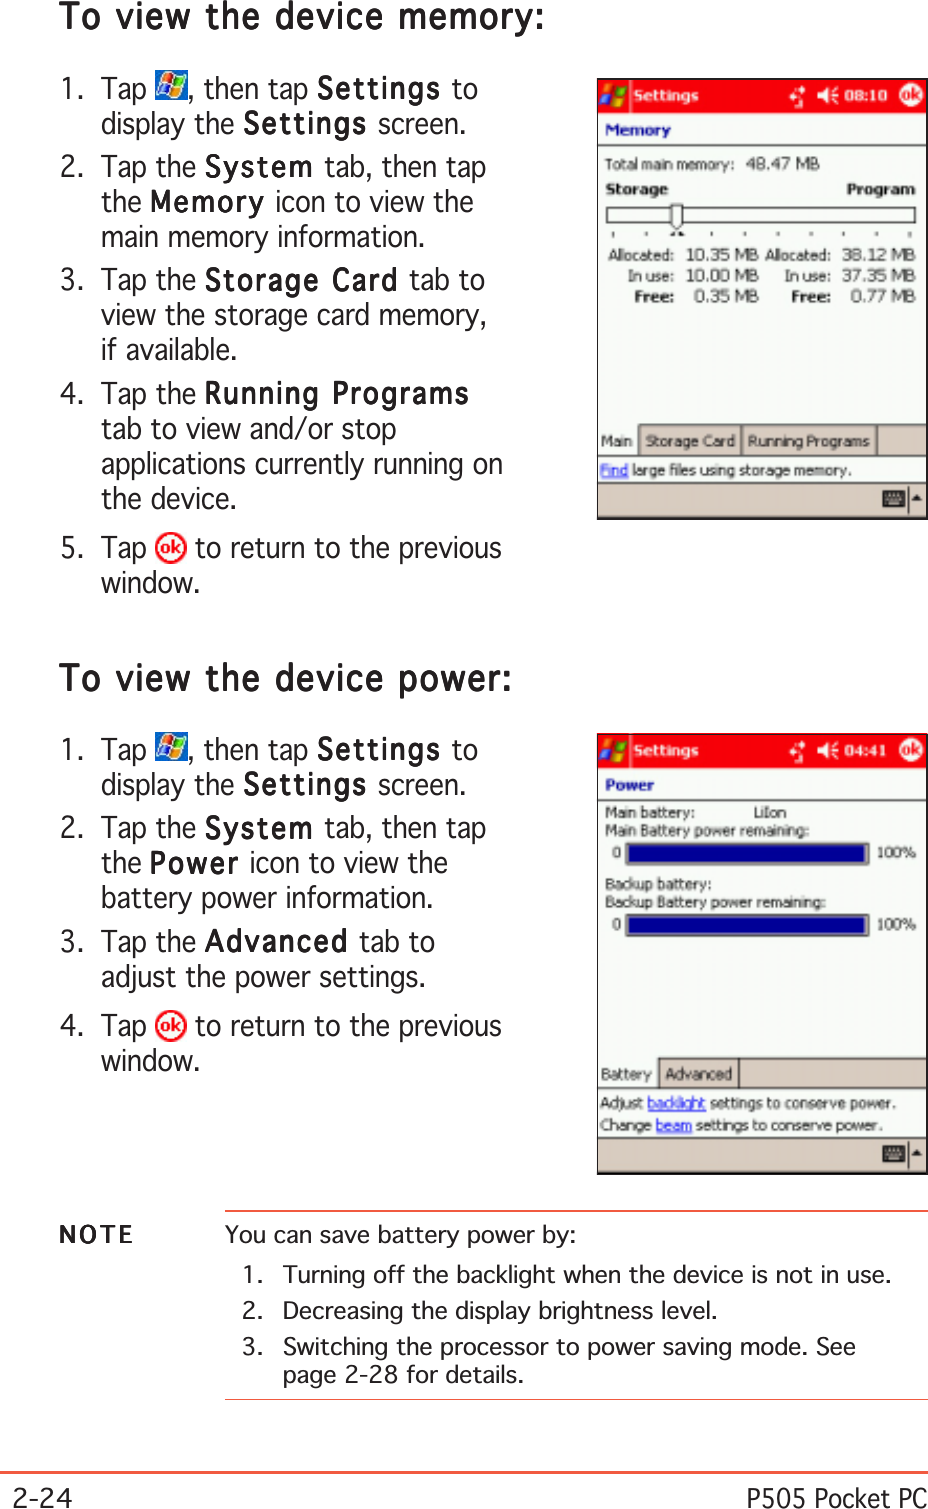 2-24P505 Pocket PCTo view the device memory:To view the device memory:To view the device memory:To view the device memory:To view the device memory:1. Tap  , then tap SettingsSettingsSettingsSettingsSettings todisplay the SettingsSettingsSettingsSettingsSettings screen.2. Tap the SystemSystemSystemSystemSystem tab, then tapthe MemoryMemoryMemoryMemoryMemory icon to view themain memory information.3. Tap the Storage Card Storage Card Storage Card Storage Card Storage Card tab toview the storage card memory,if available.4. Tap the Running ProgramsRunning ProgramsRunning ProgramsRunning ProgramsRunning Programstab to view and/or stopapplications currently running onthe device.5. Tap   to return to the previouswindow.To view the device power:To view the device power:To view the device power:To view the device power:To view the device power:1. Tap  , then tap SettingsSettingsSettingsSettingsSettings todisplay the SettingsSettingsSettingsSettingsSettings screen.2. Tap the SystemSystemSystemSystemSystem tab, then tapthe PowerPowerPowerPowerPower icon to view thebattery power information.3. Tap the AdvancedAdvancedAdvancedAdvancedAdvanced tab toadjust the power settings.4. Tap   to return to the previouswindow.NOTENOTENOTENOTEN O T E You can save battery power by:1. Turning off the backlight when the device is not in use.2. Decreasing the display brightness level.3. Switching the processor to power saving mode. Seepage 2-28 for details.